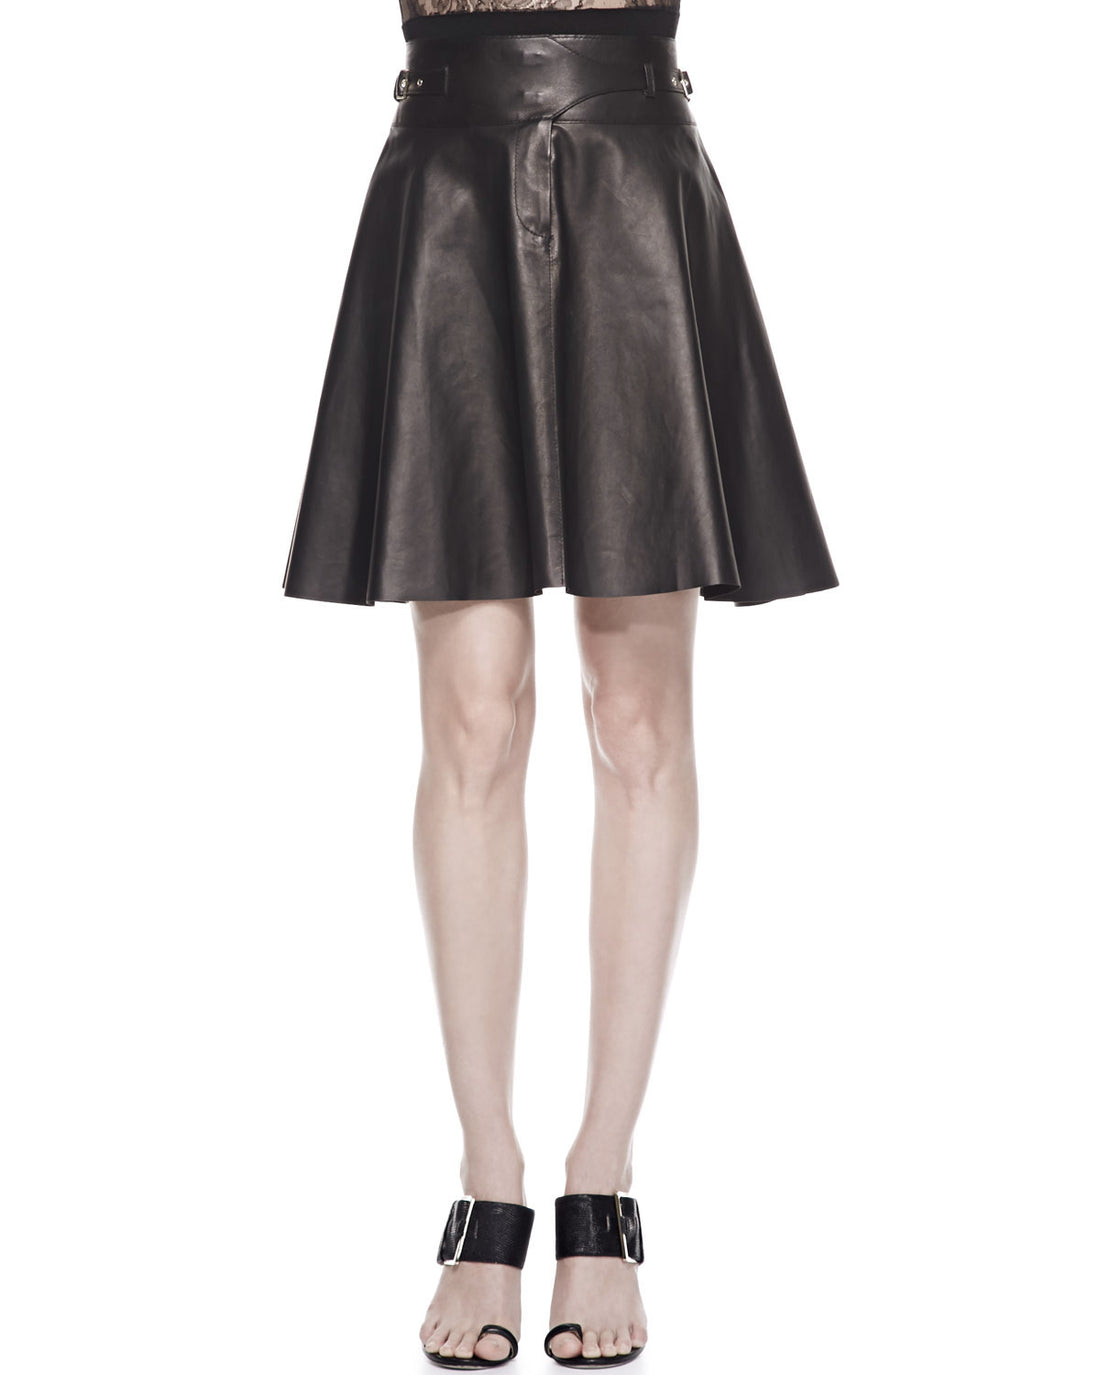 Jason Wu Black leather Short Skirt with Buckles at Waist